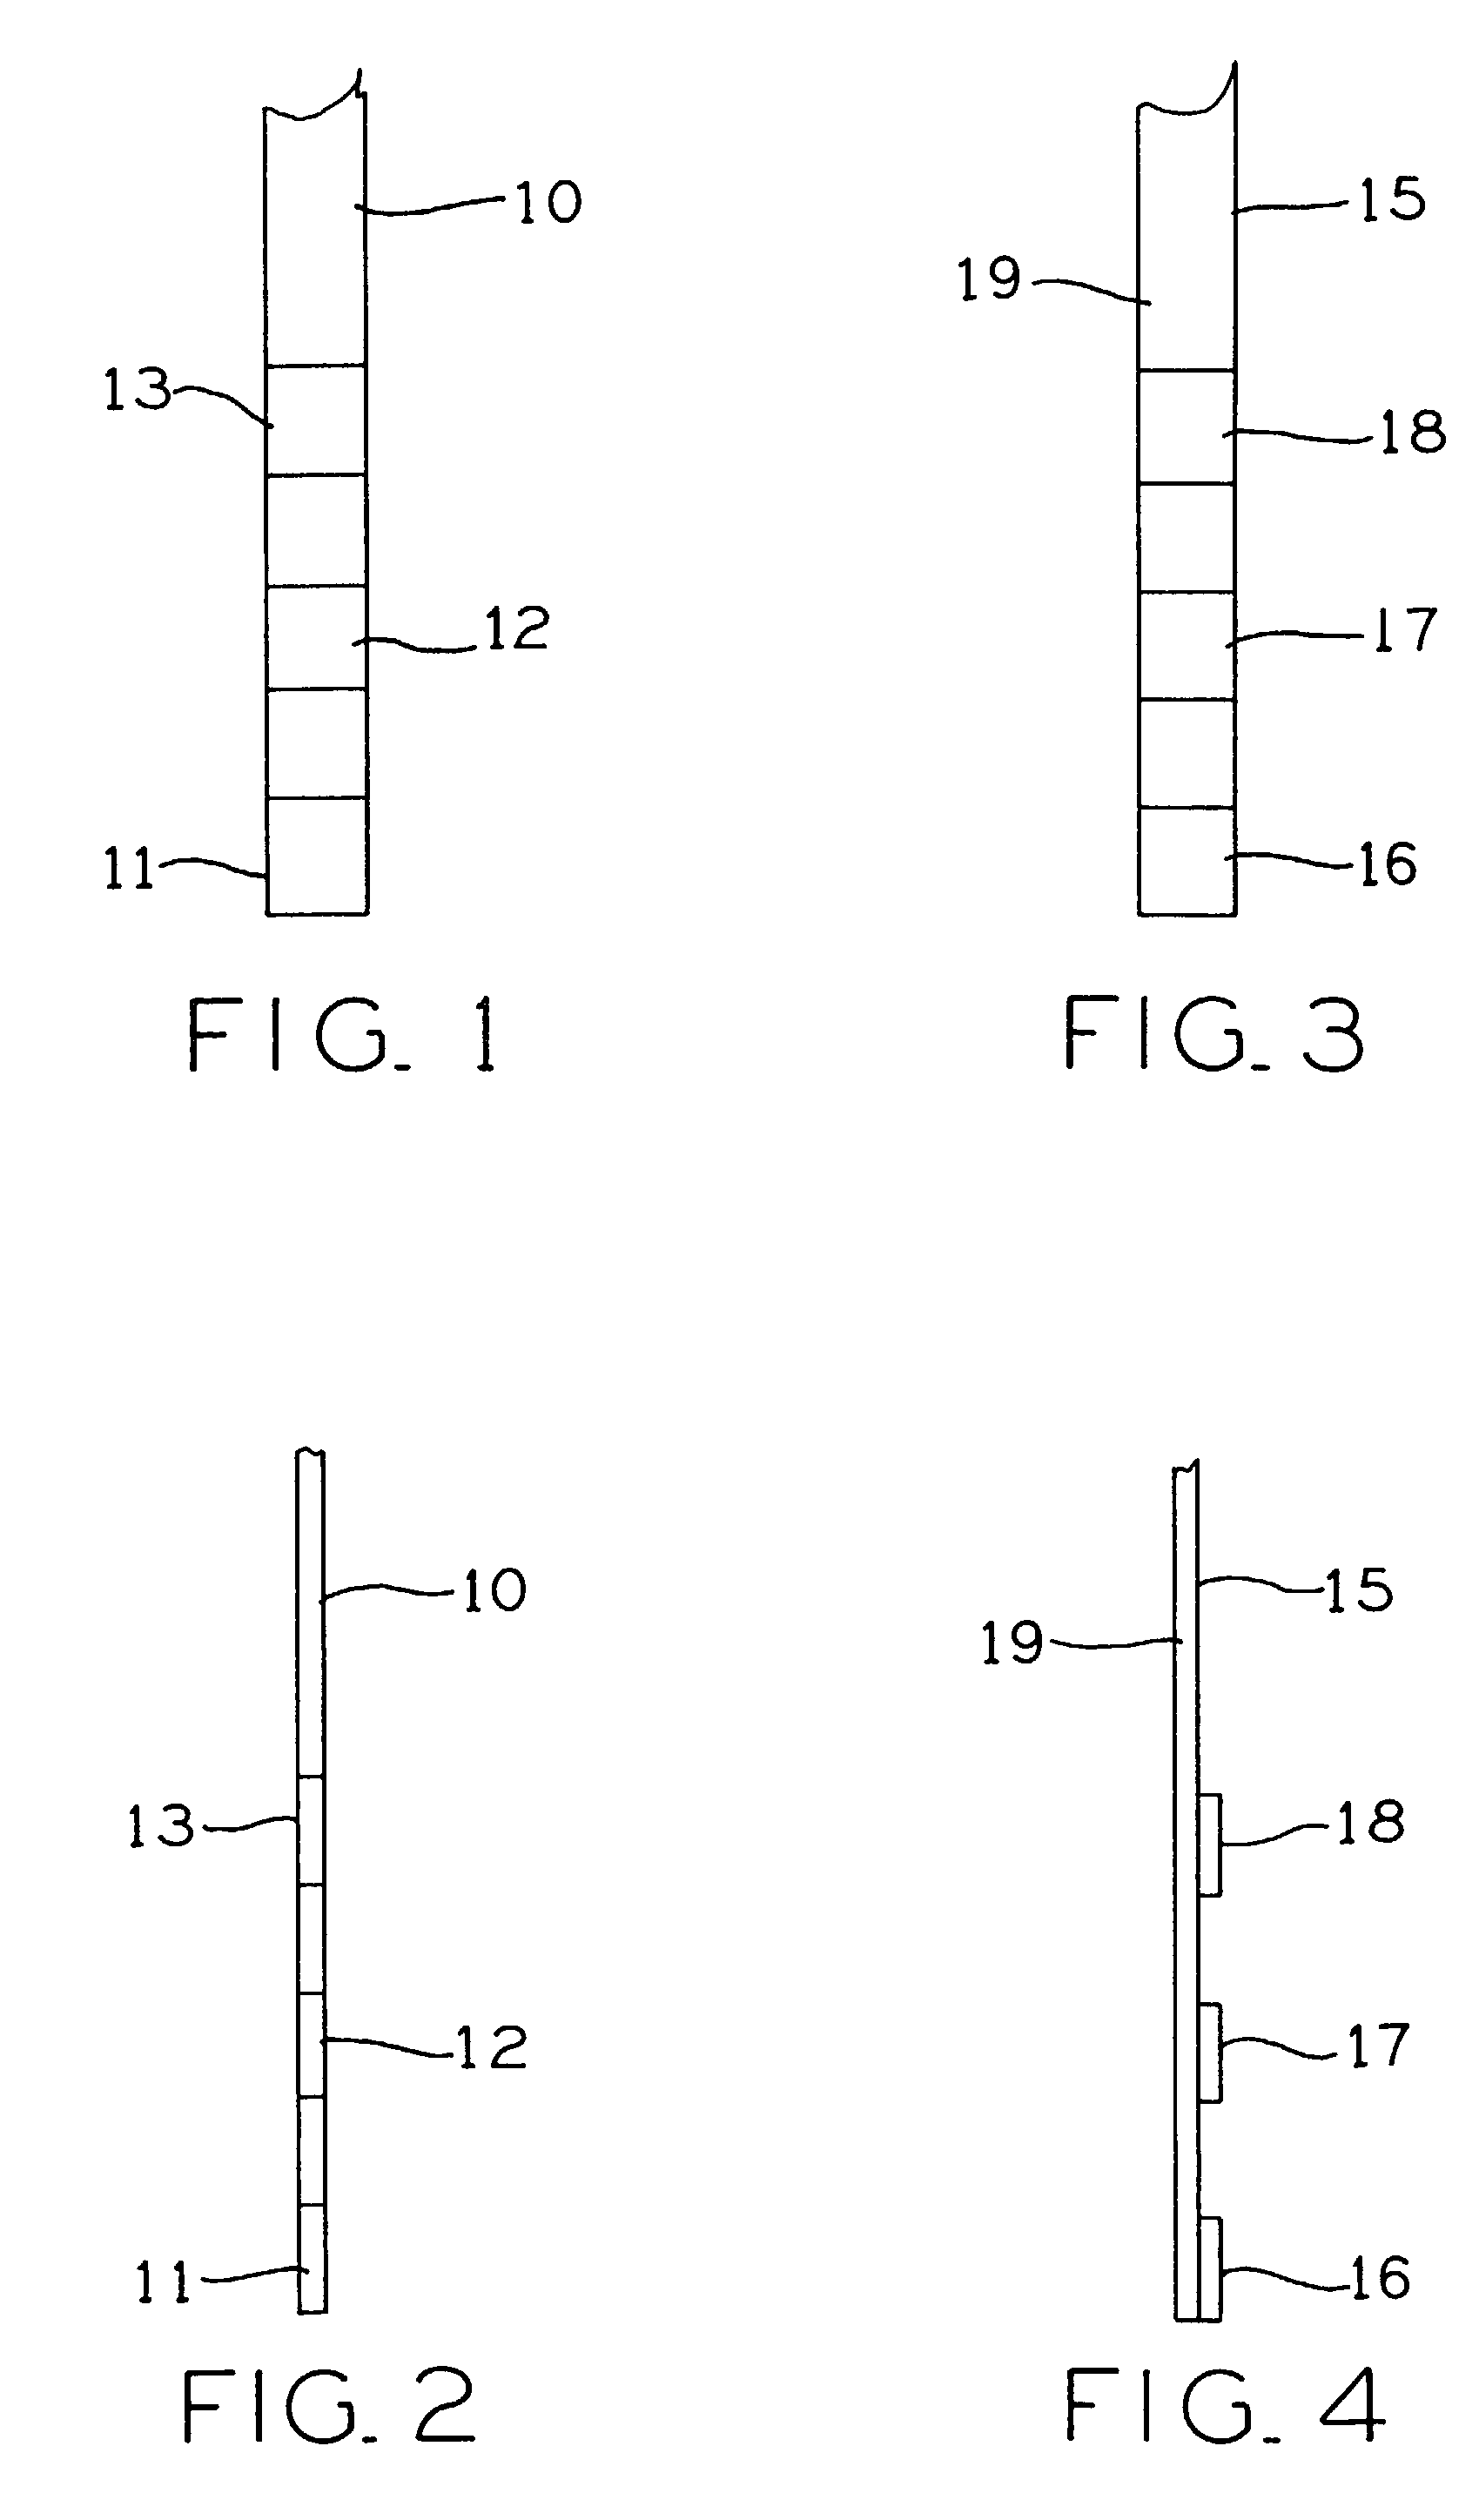 Test strip for determining dialysate composition